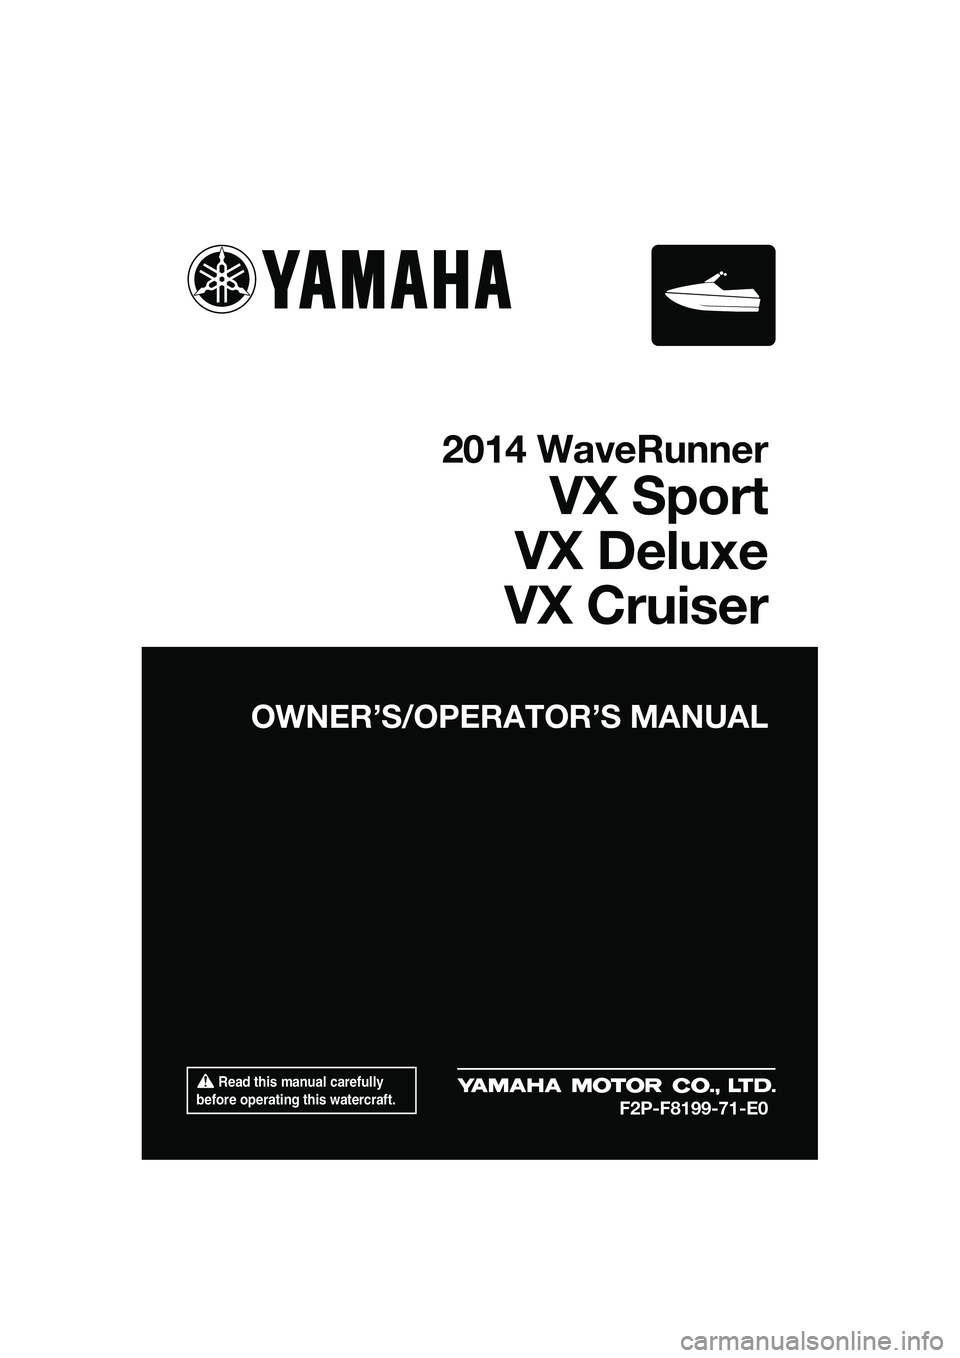 YAMAHA VX CRUISER 2014  Owners Manual  Read this manual carefully 
before operating this watercraft.
OWNER’S/OPERAT OR’S MANUAL
2014 WaveRunner
VX Sport
VX Deluxe
VX Cruiser
F2P-F8199-71-E0
UF2P71E0.book  Page 1  Wednesday, July 10, 2